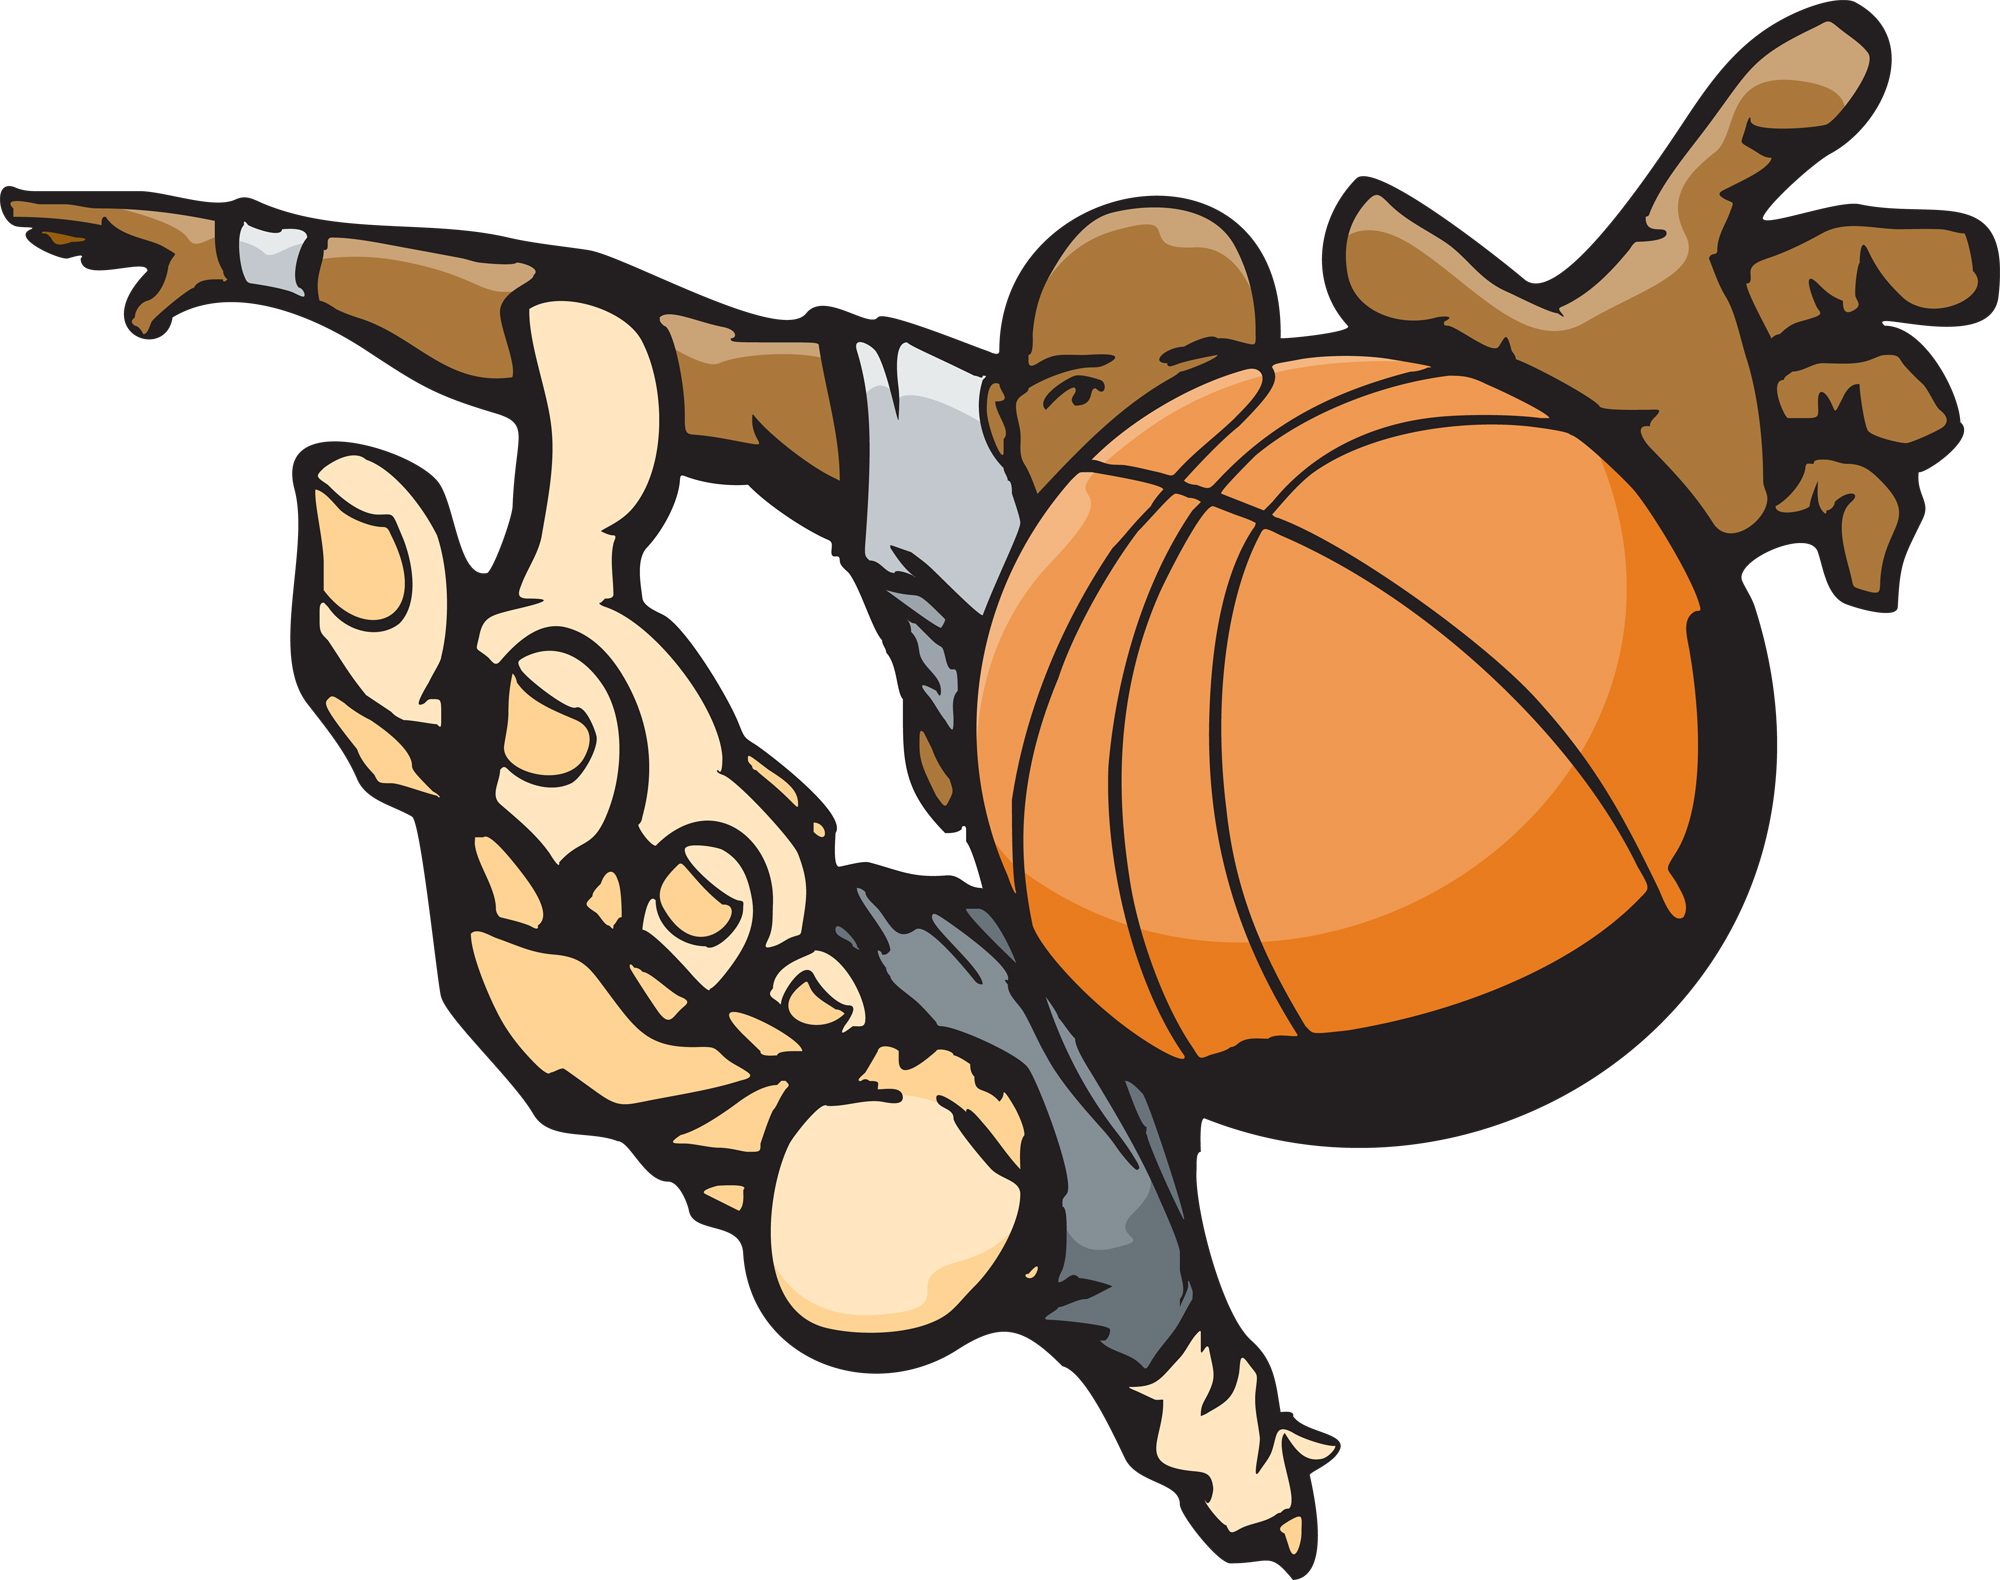 FREE Basketball Clipart (Royalty-free)